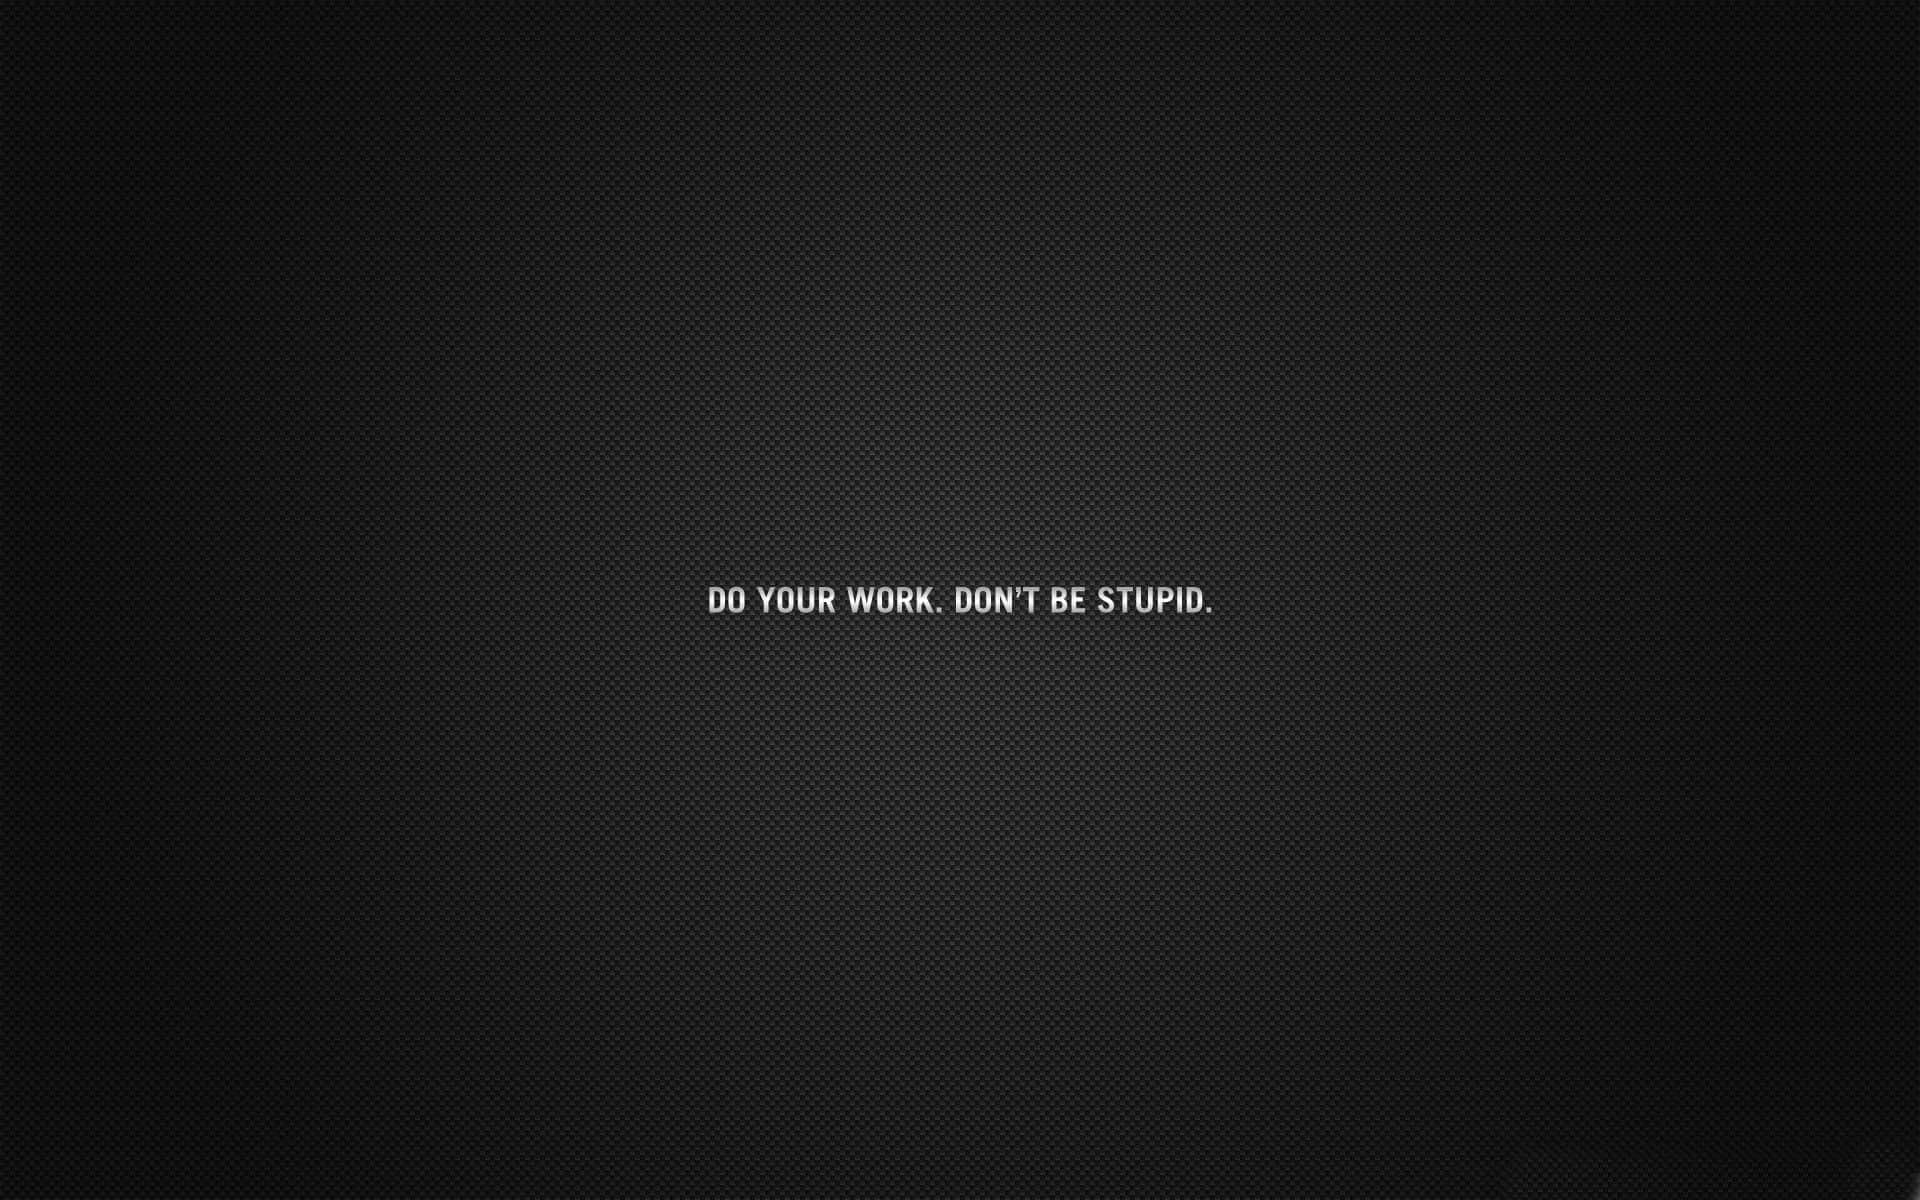 Motivational Work Quote Background Wallpaper